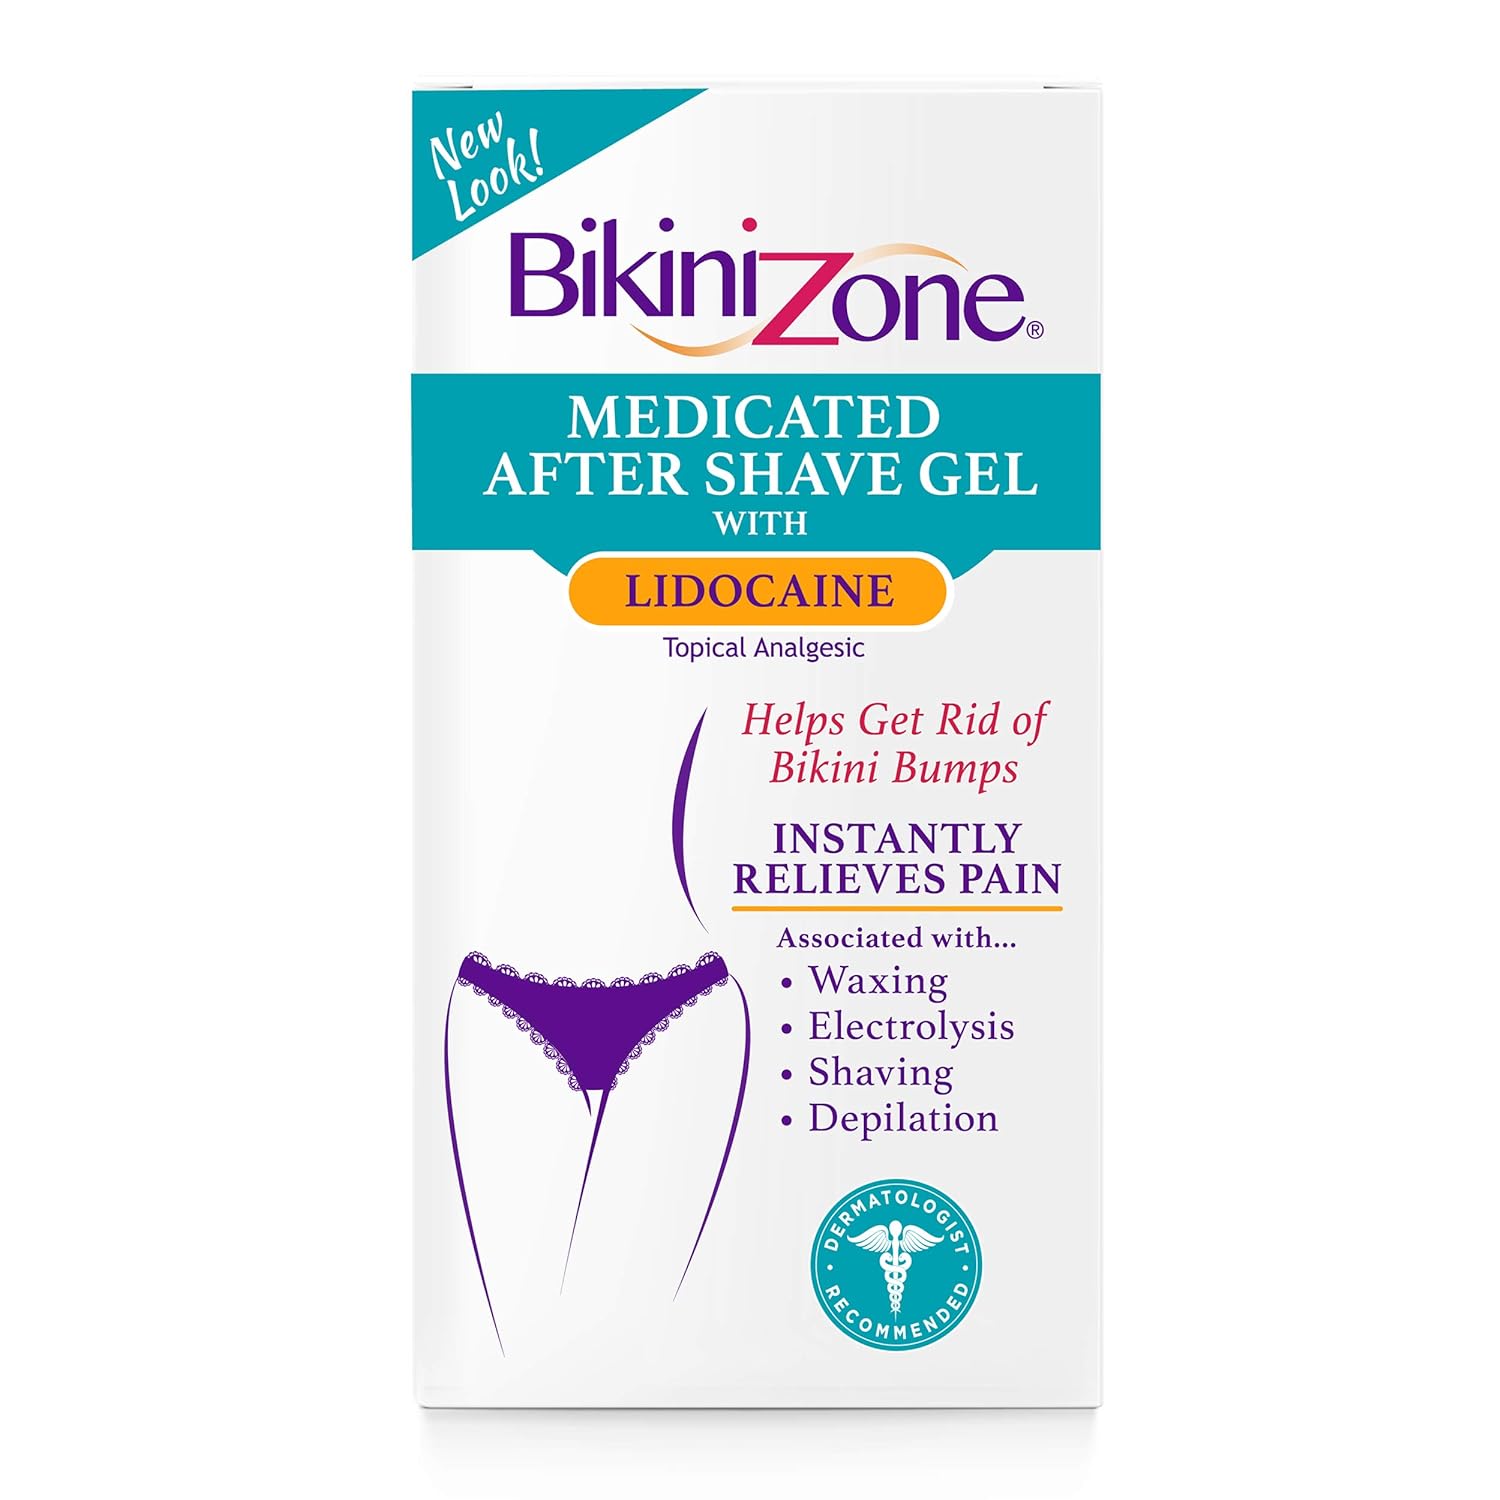 Bikini Zone Medicated After Shave Gel - Gently Formulated Gel for Bikini & Delicate Areas - Helps Stop Shave Bumps & Irritation - Use after Shaving, Waxing, or Depilation - Dye-Free (1 oz, 1 Pack)